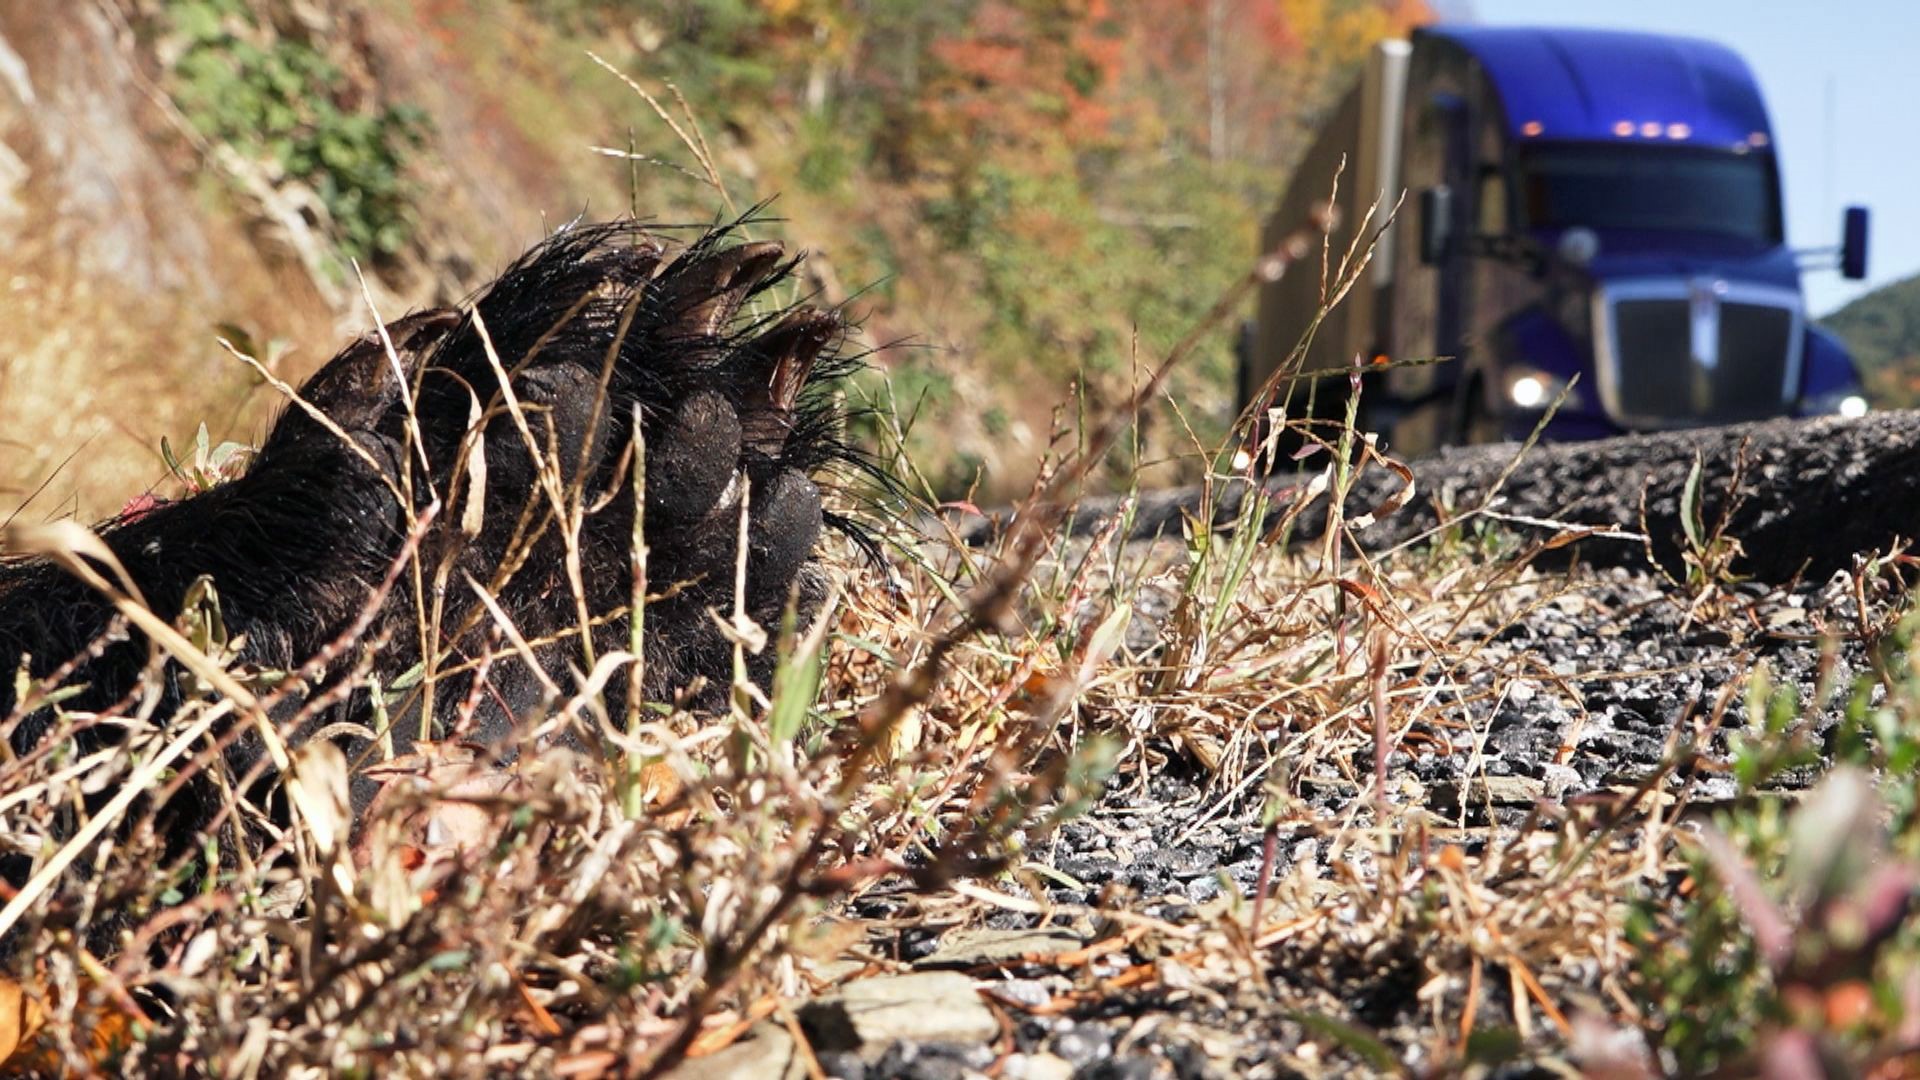 Researchers want to create safe crossings for bears, elk, and other wildlife on a stretch of I-40 known as a 'death trap' in the Pigeon River gorge.